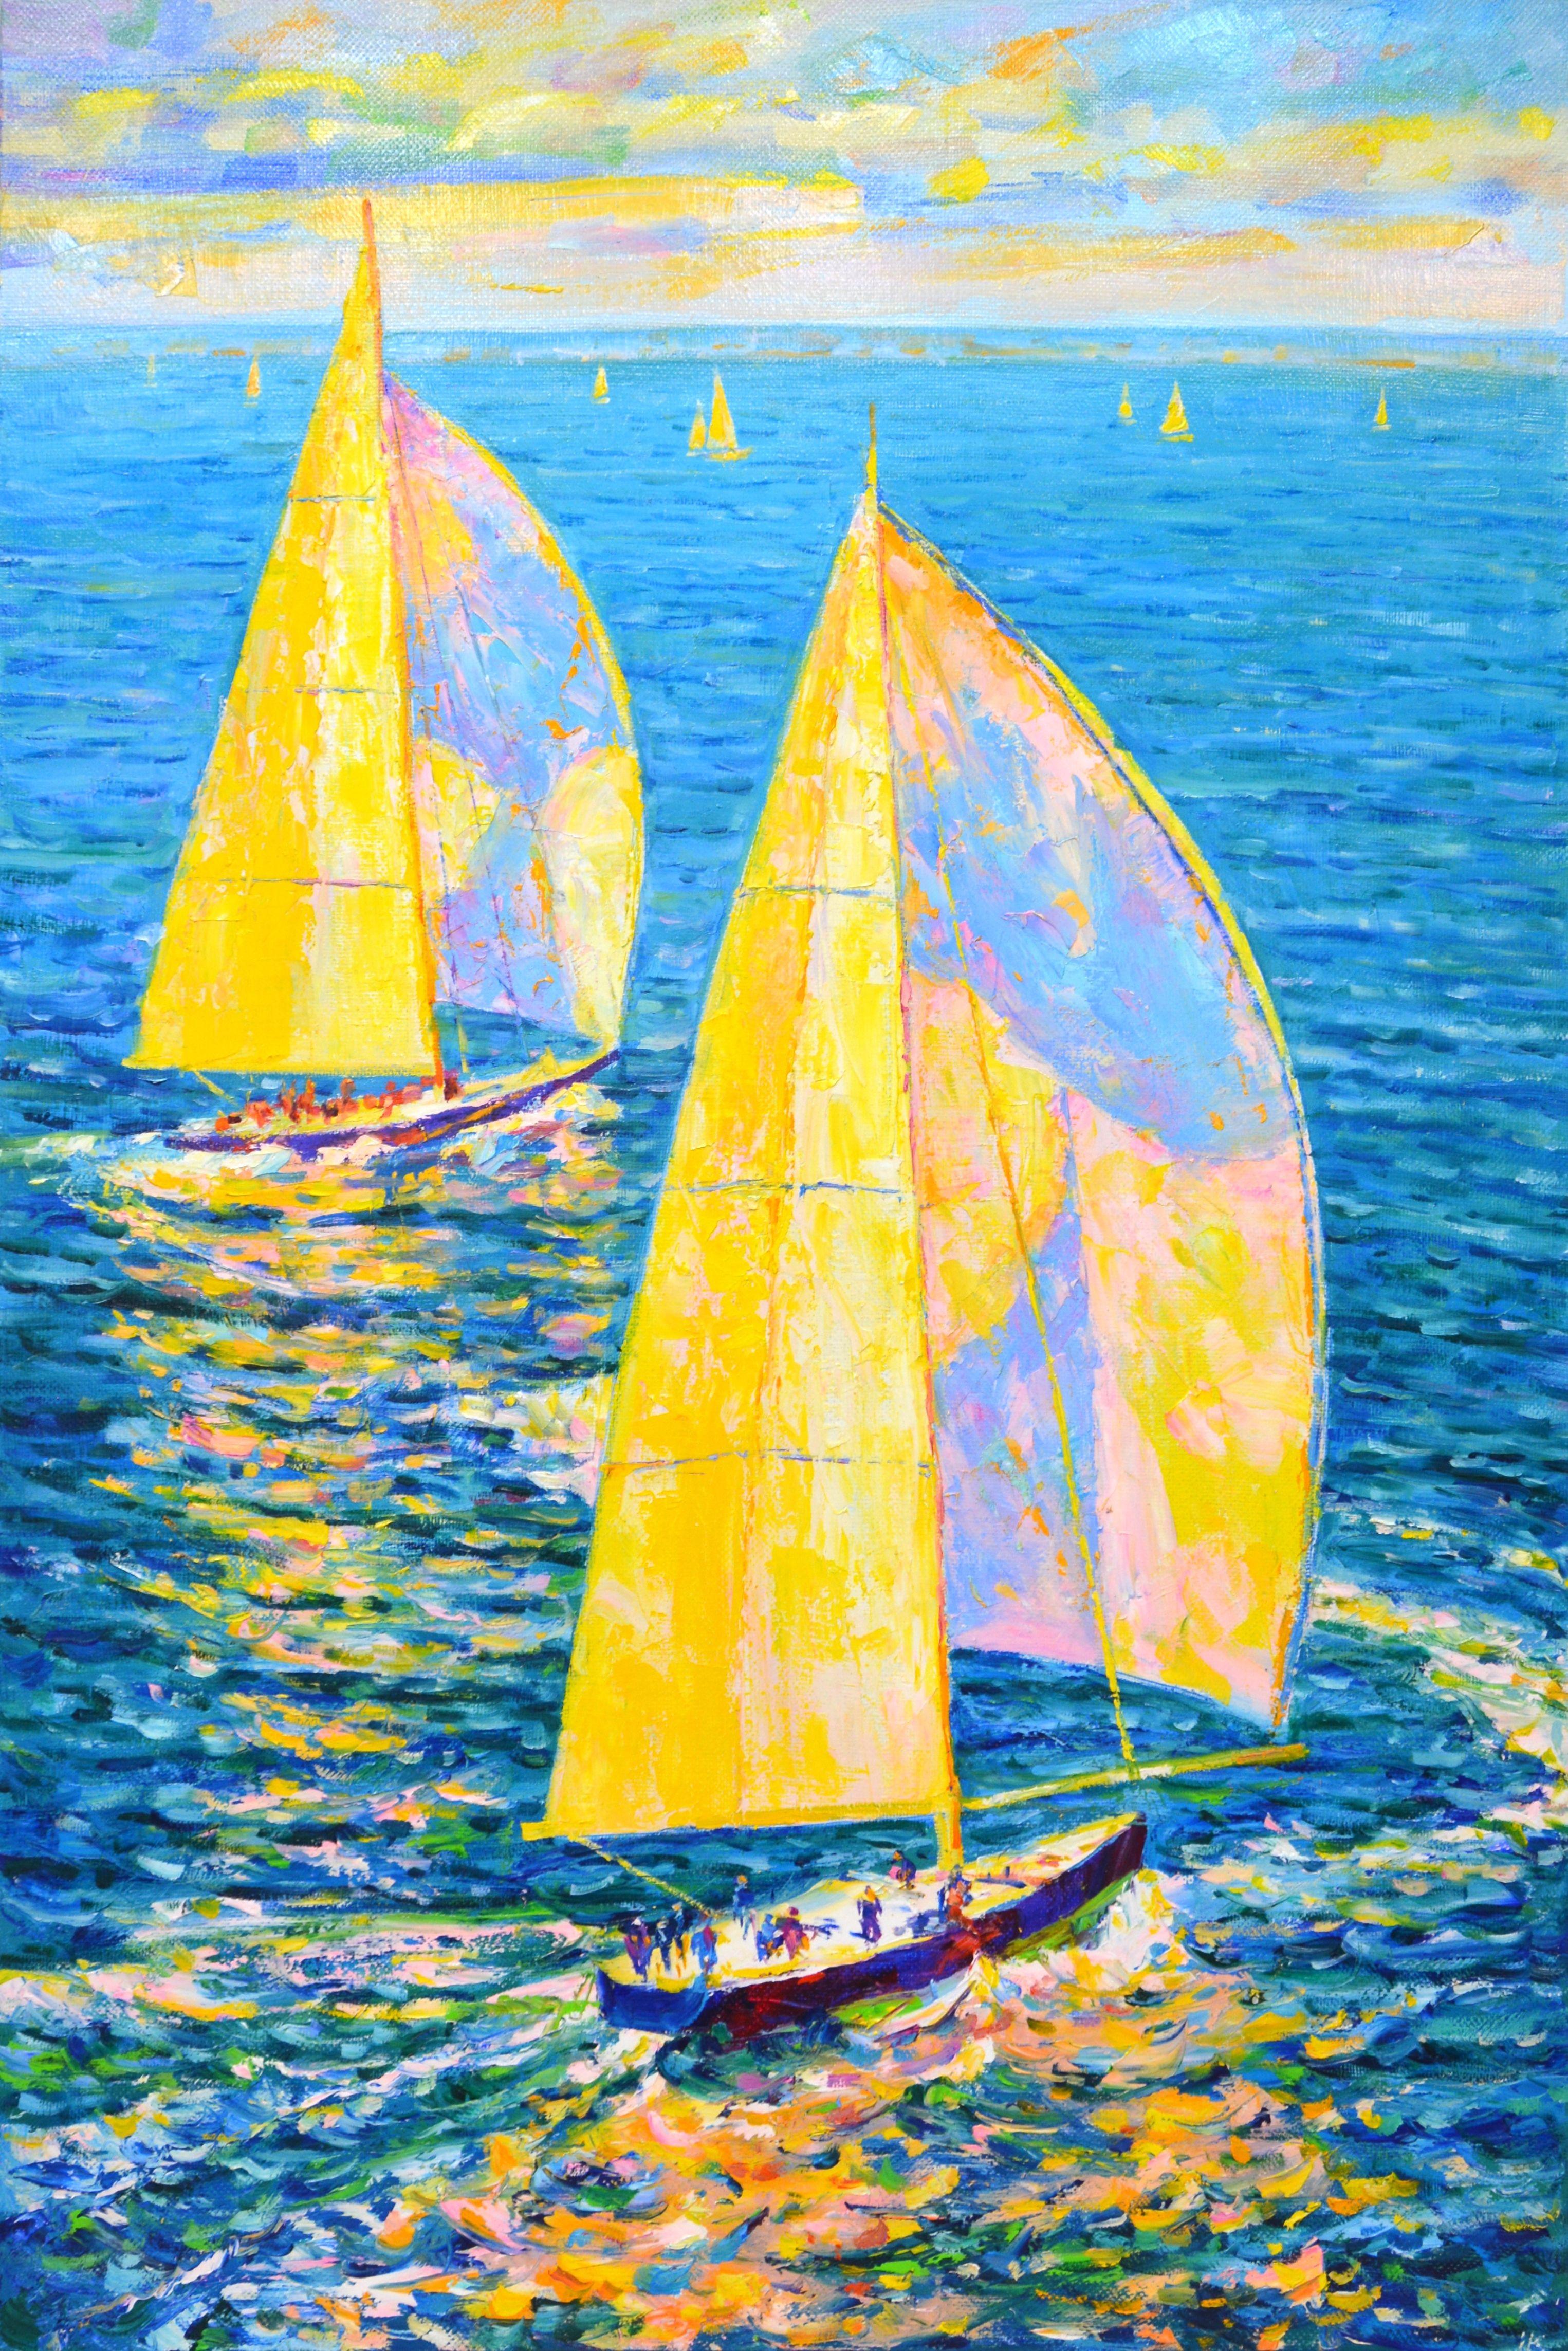 Solar yachts. Sailboats sail under the midday sun, golden light reflects off the sail and passing clouds, the ocean, a serene view, creates an atmosphere of relaxation, harmony and bliss. Realism. Impressionism. The work of the palette knife